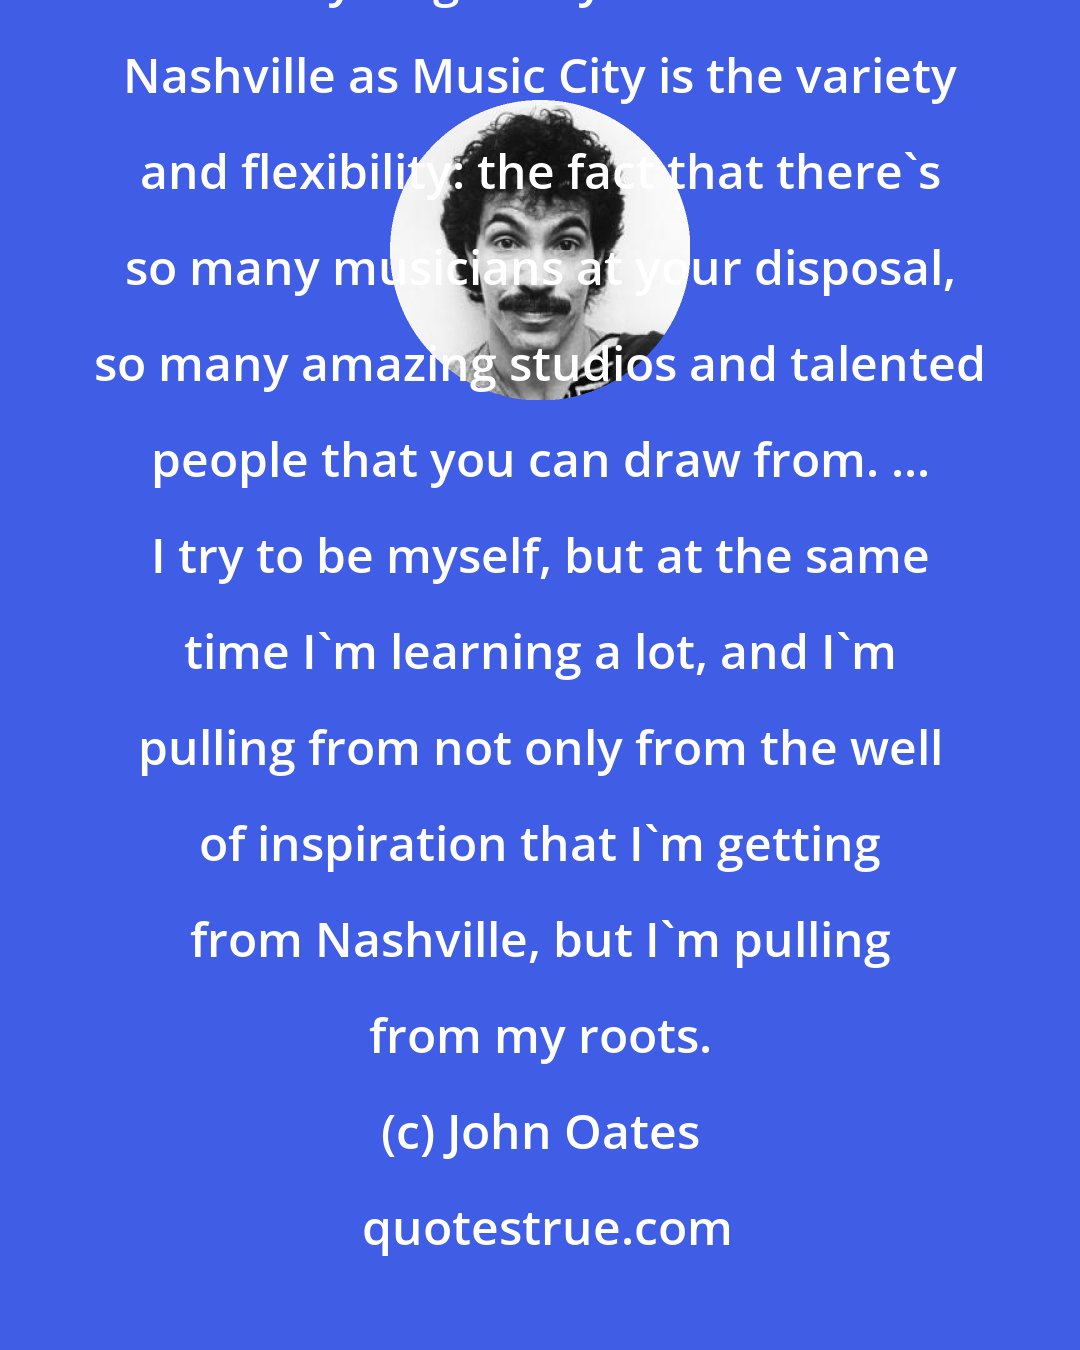 John Oates: I didn't come to Nashville to put on a cowboy hat and pretend to be a country singer. My attraction to Nashville as Music City is the variety and flexibility: the fact that there's so many musicians at your disposal, so many amazing studios and talented people that you can draw from. ... I try to be myself, but at the same time I'm learning a lot, and I'm pulling from not only from the well of inspiration that I'm getting from Nashville, but I'm pulling from my roots.